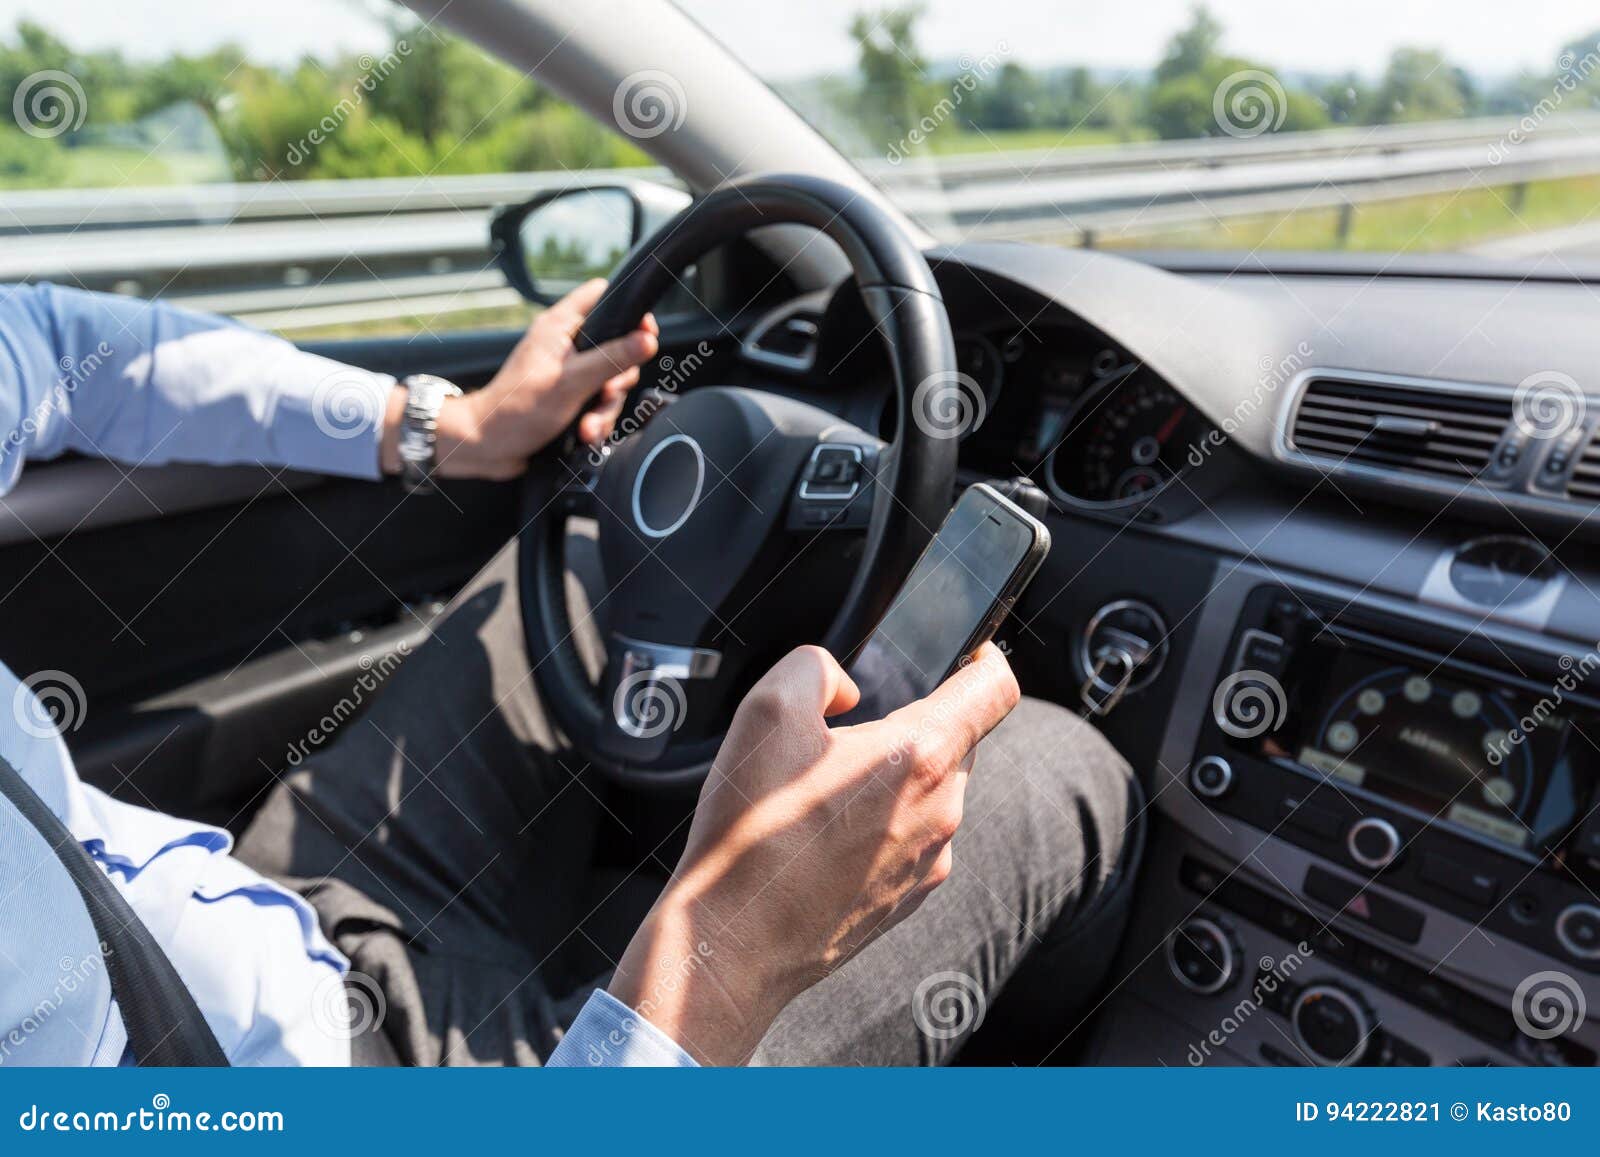 businessman texting on his mobile phone while driving.